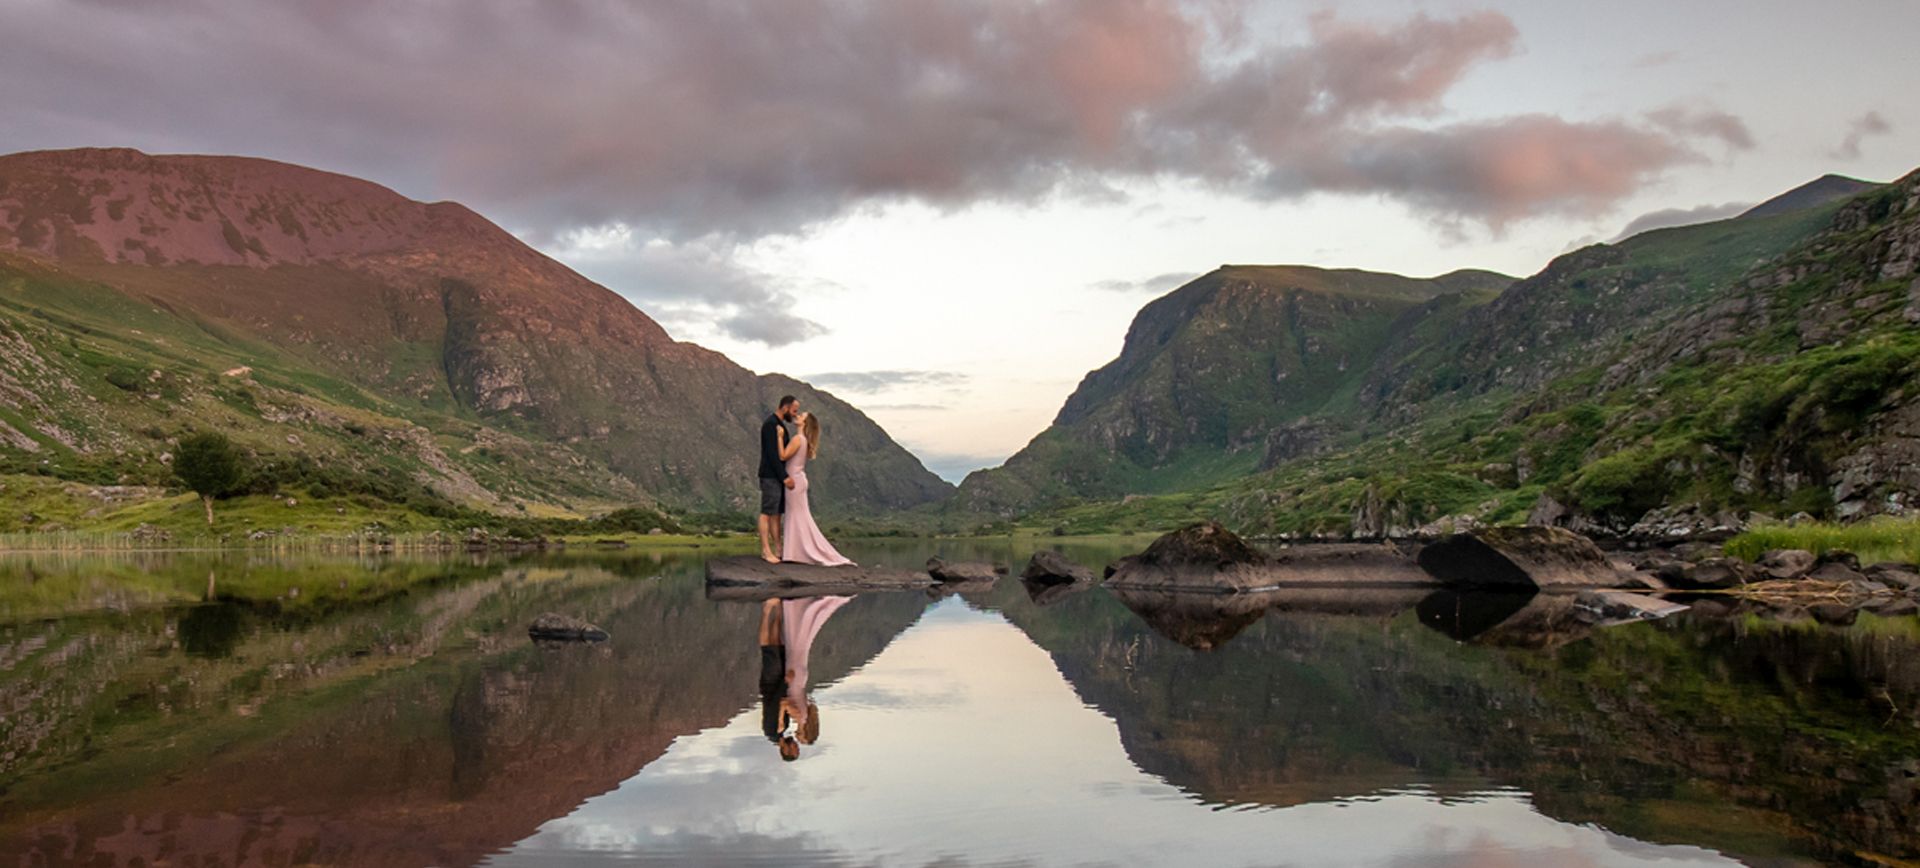 couple photoshoot in ireland - mountain adventure session in donegal